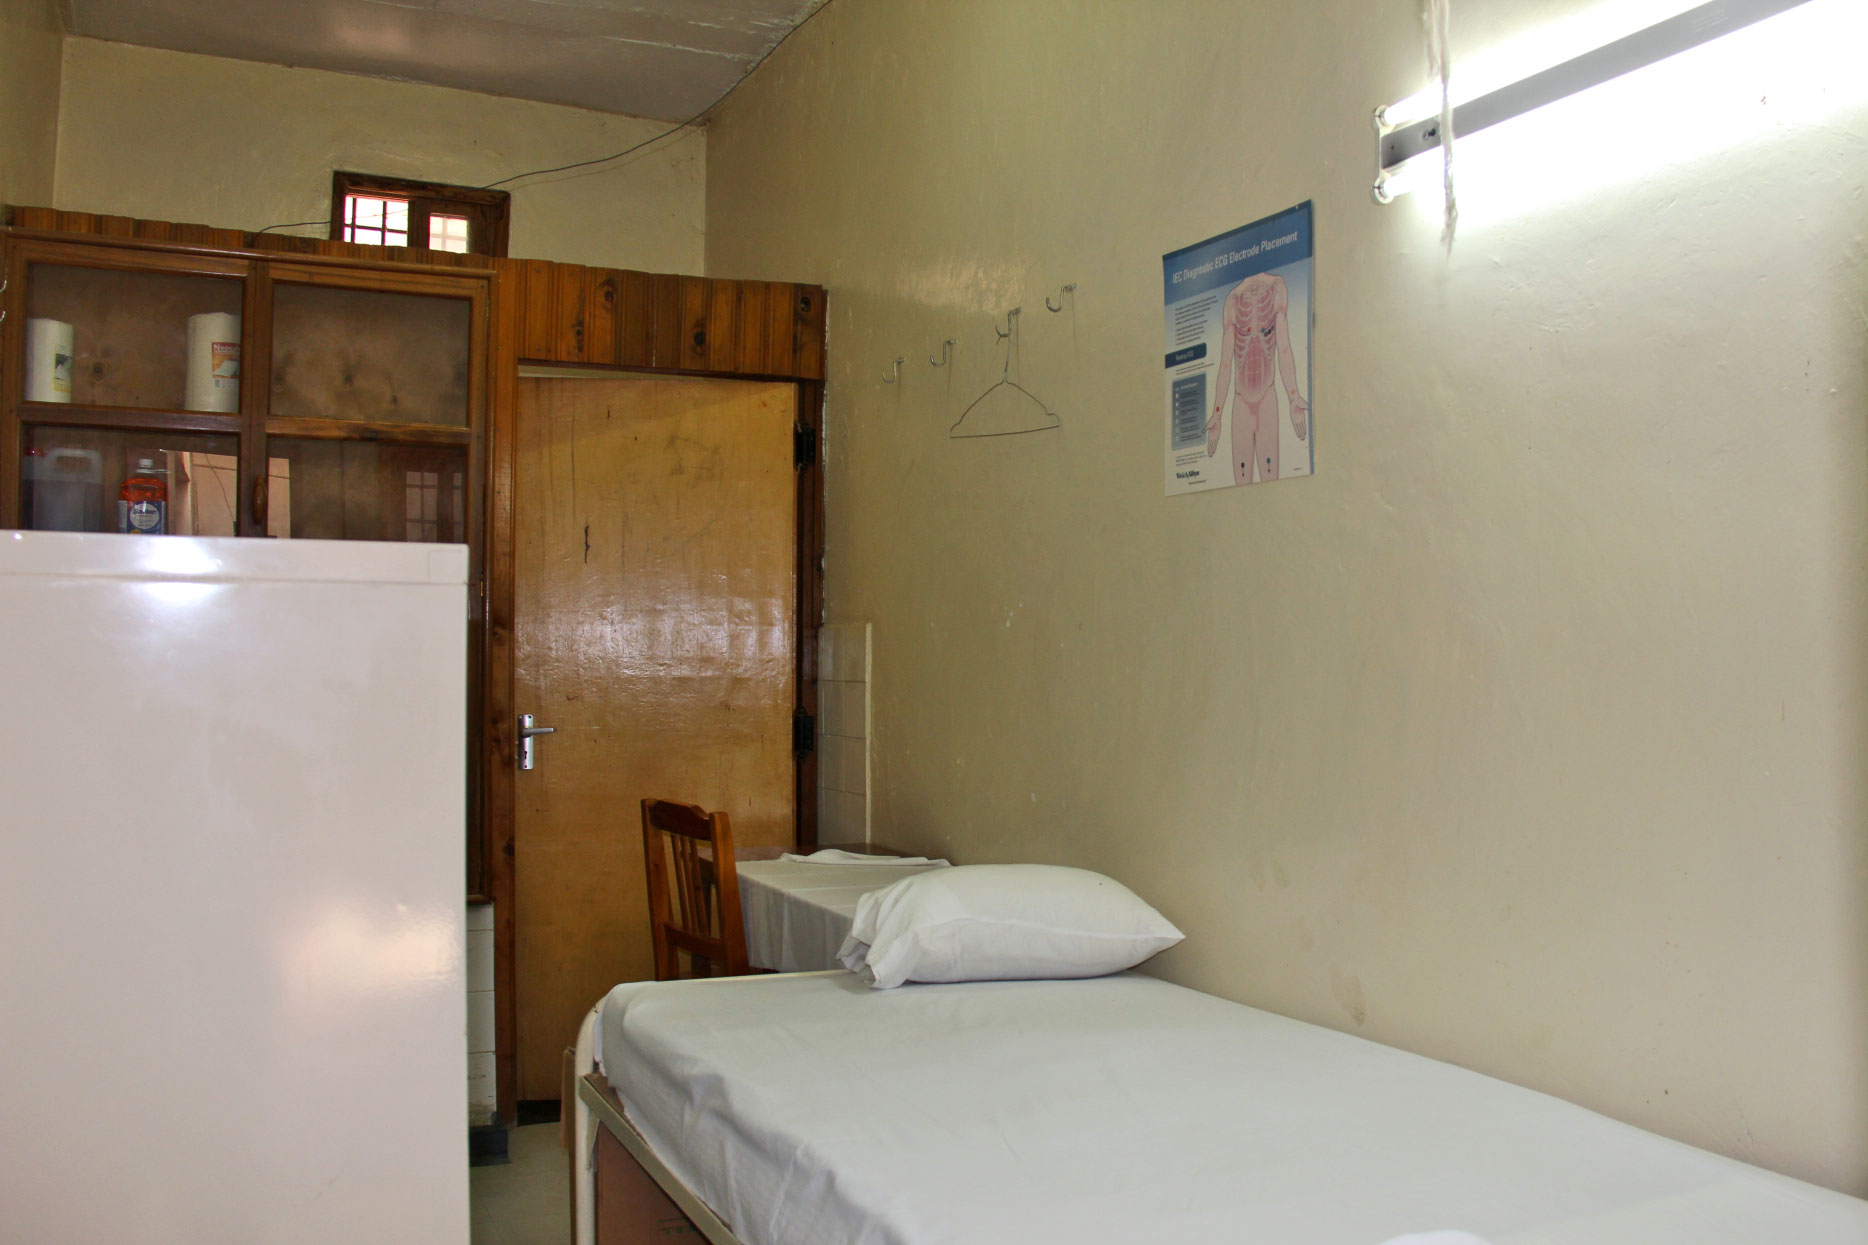 The Medical office at the United Nations Detention Facility in Arusha, Tanzania